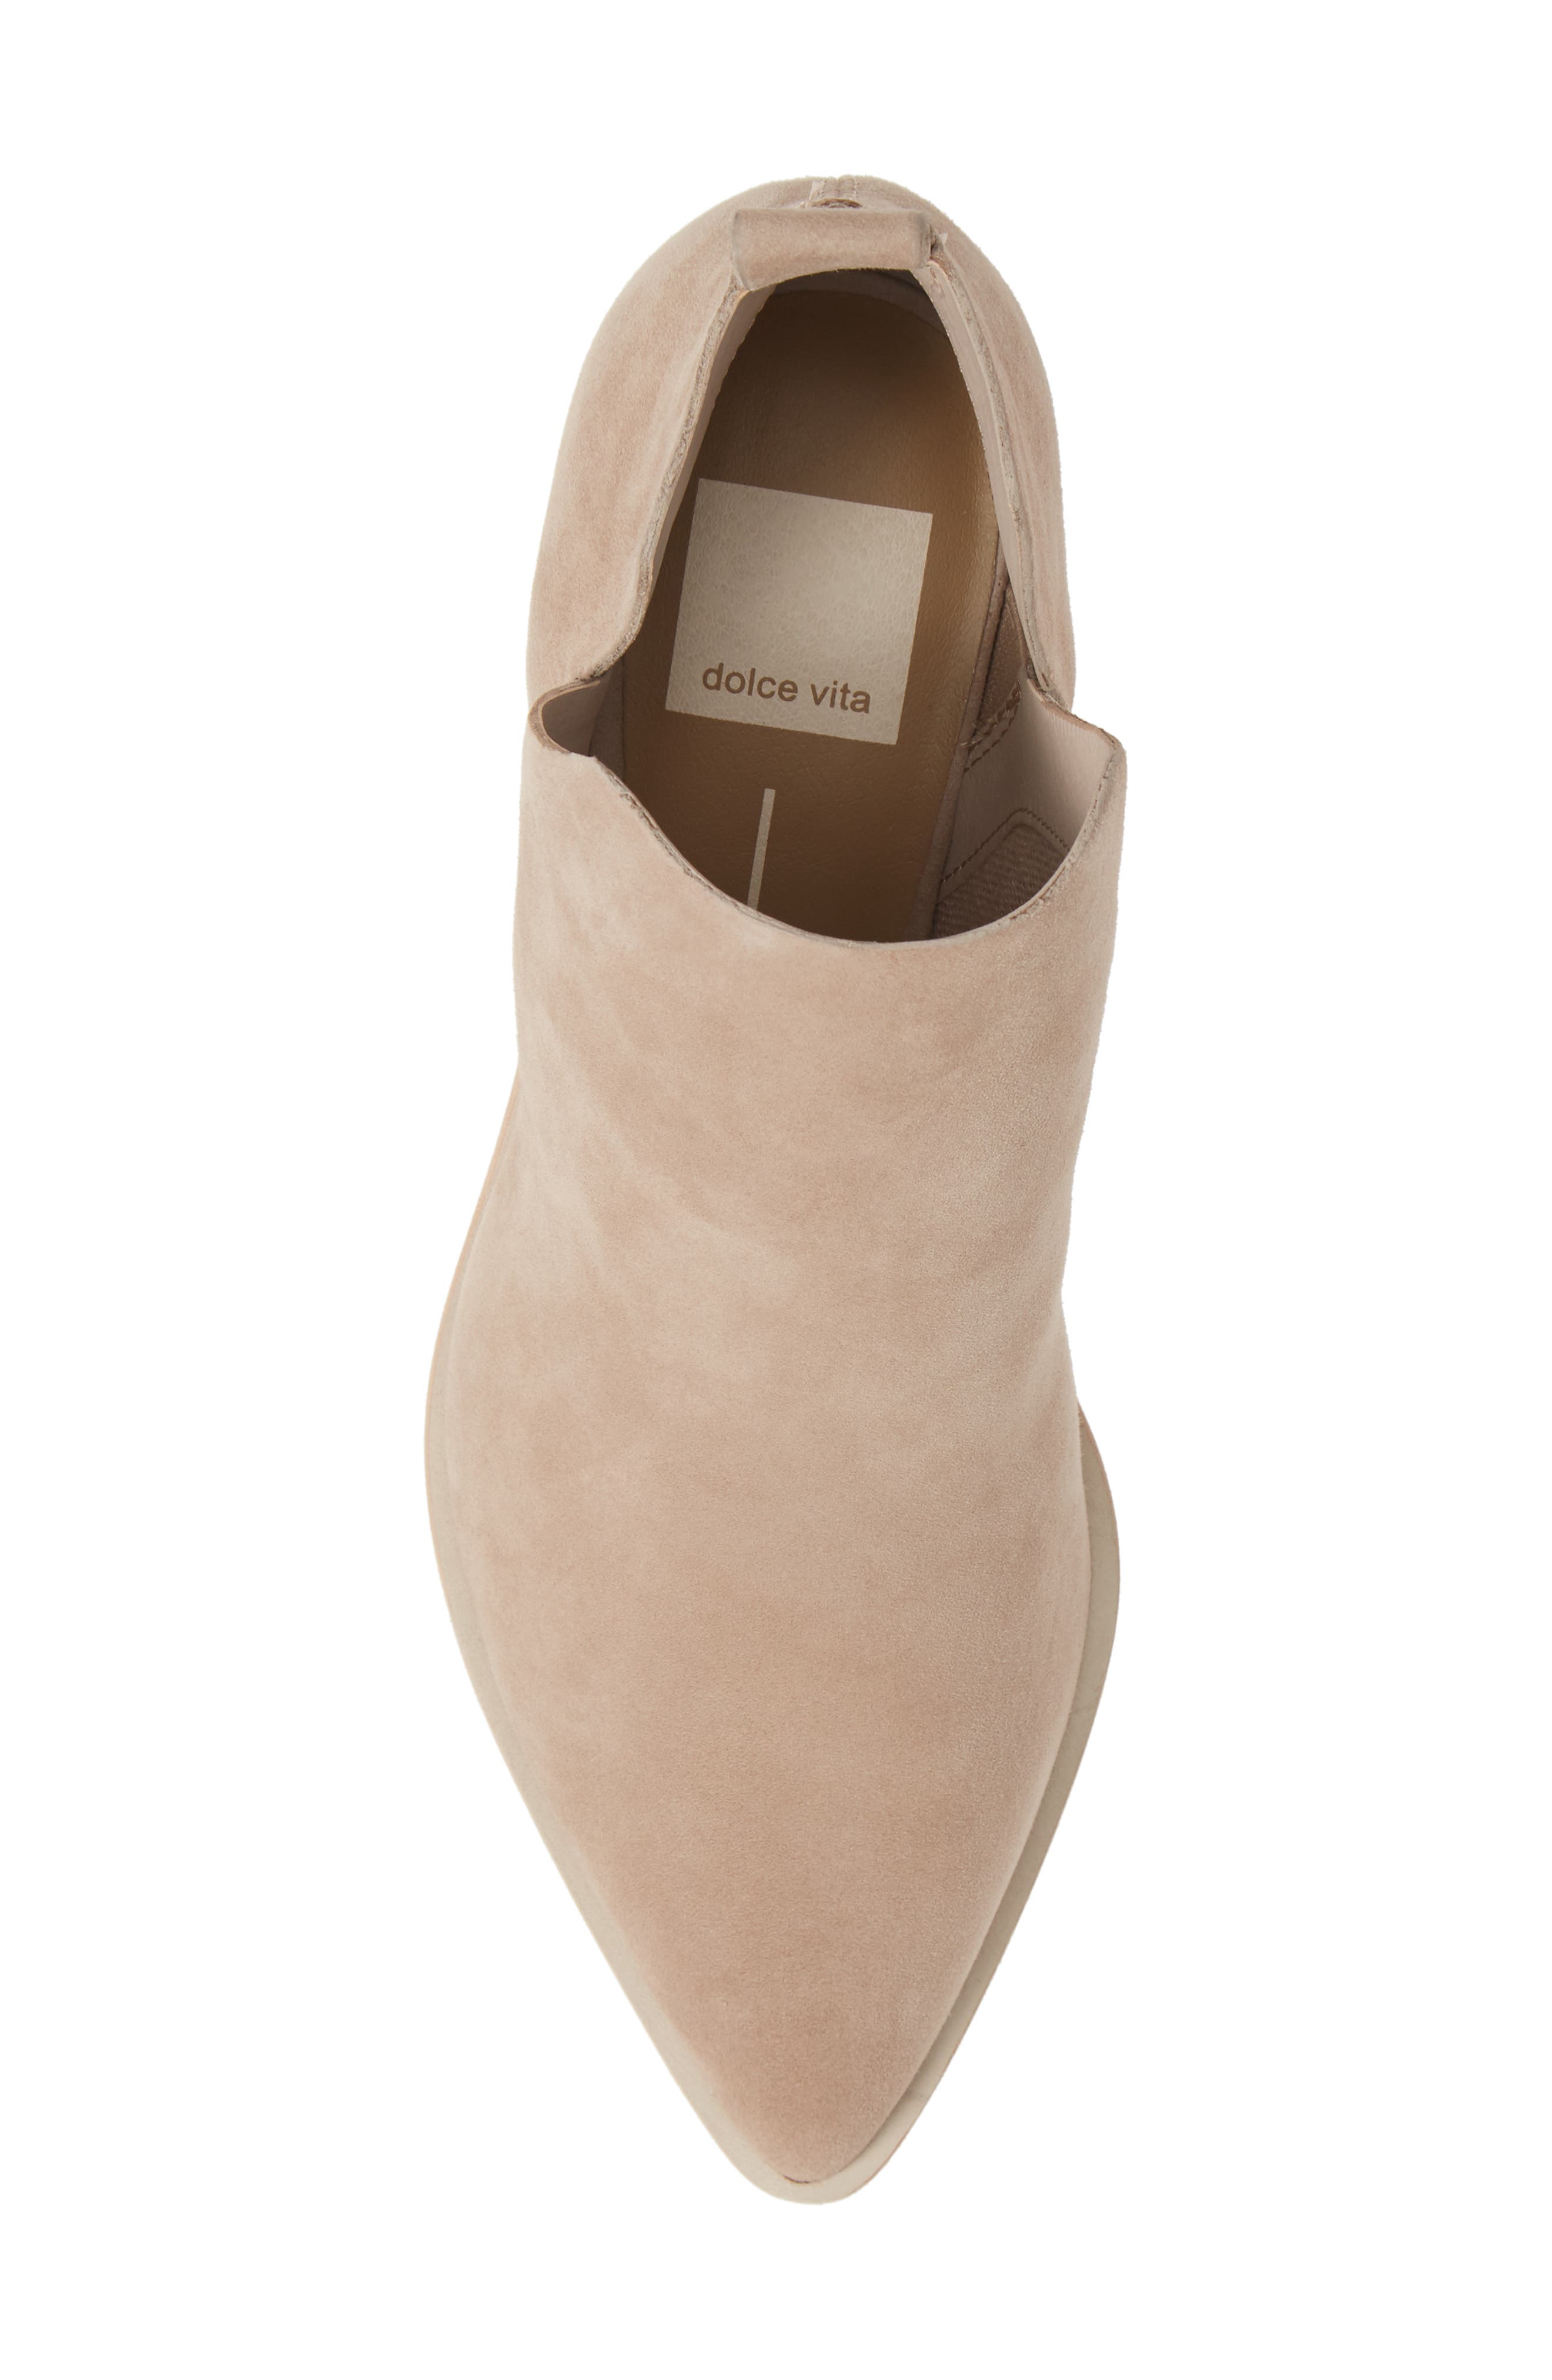 sonni pointy toe bootie